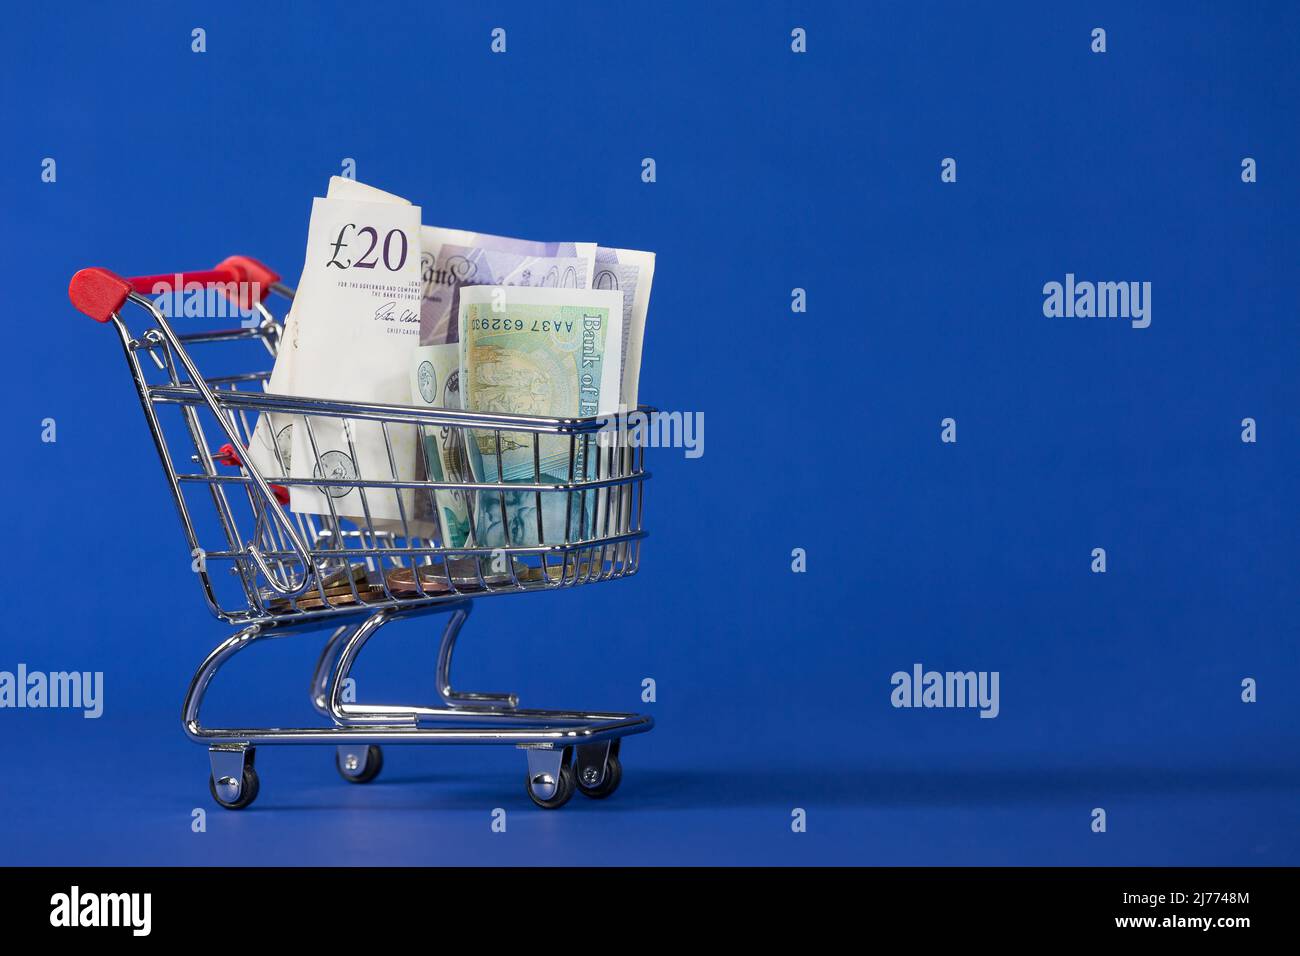 Mini Shopping Cart Trolly with Cash Notes in the Basket on a Blue Background Stock Photo